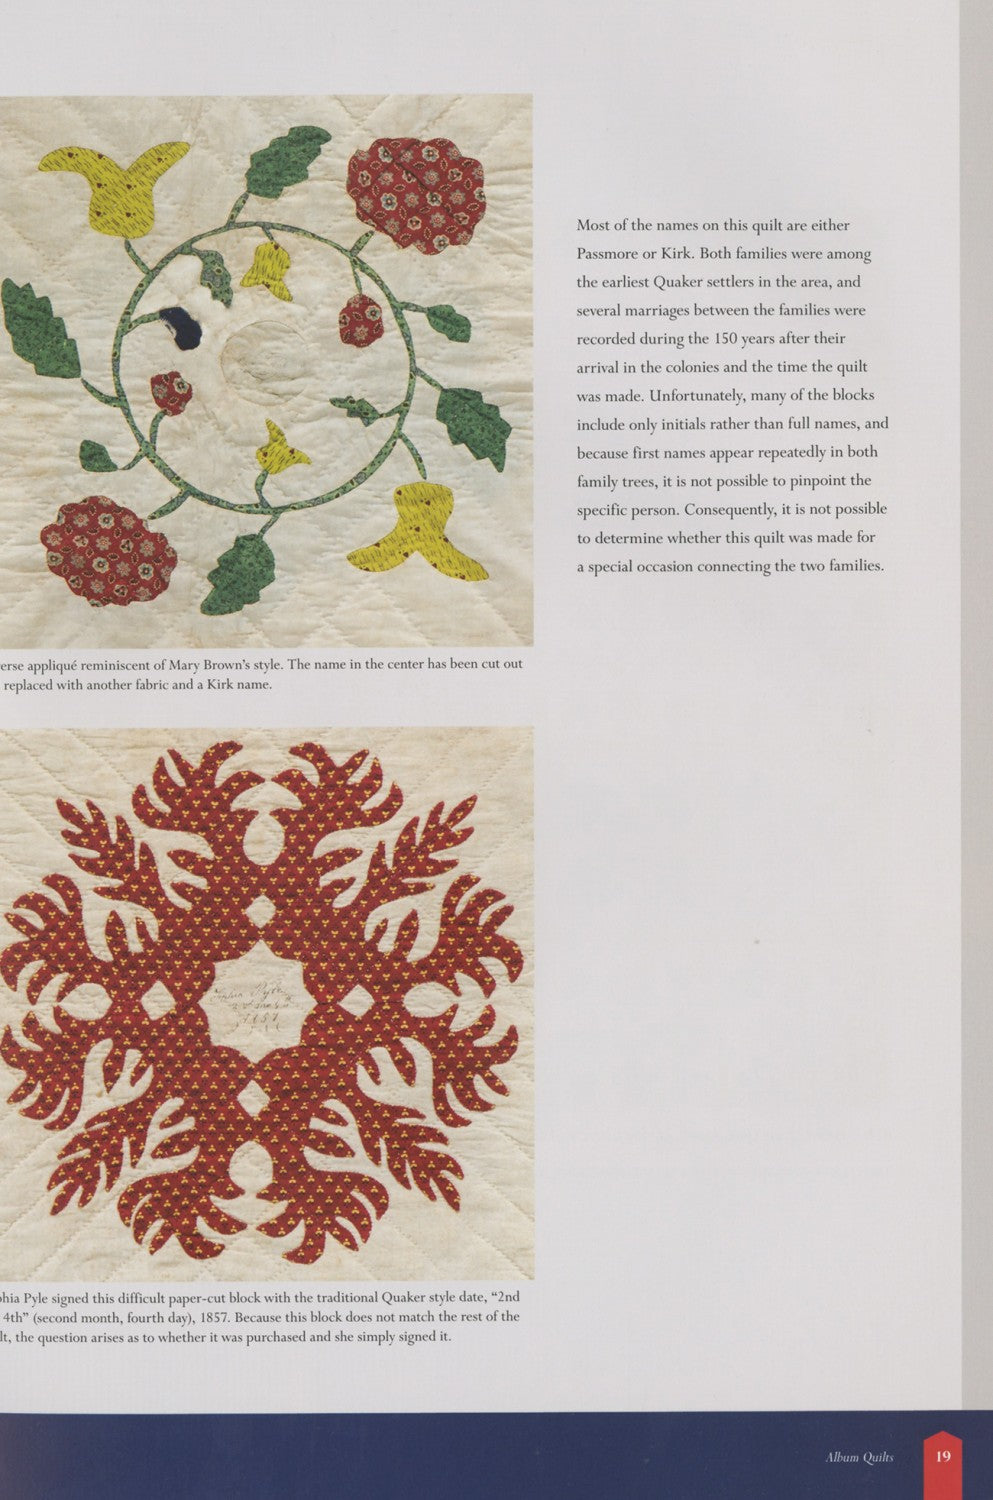 Hidden Treasures, Quilts from 1600 to 1860 by Lori Lee Triplett and Kay Triplett for C&T Publishing